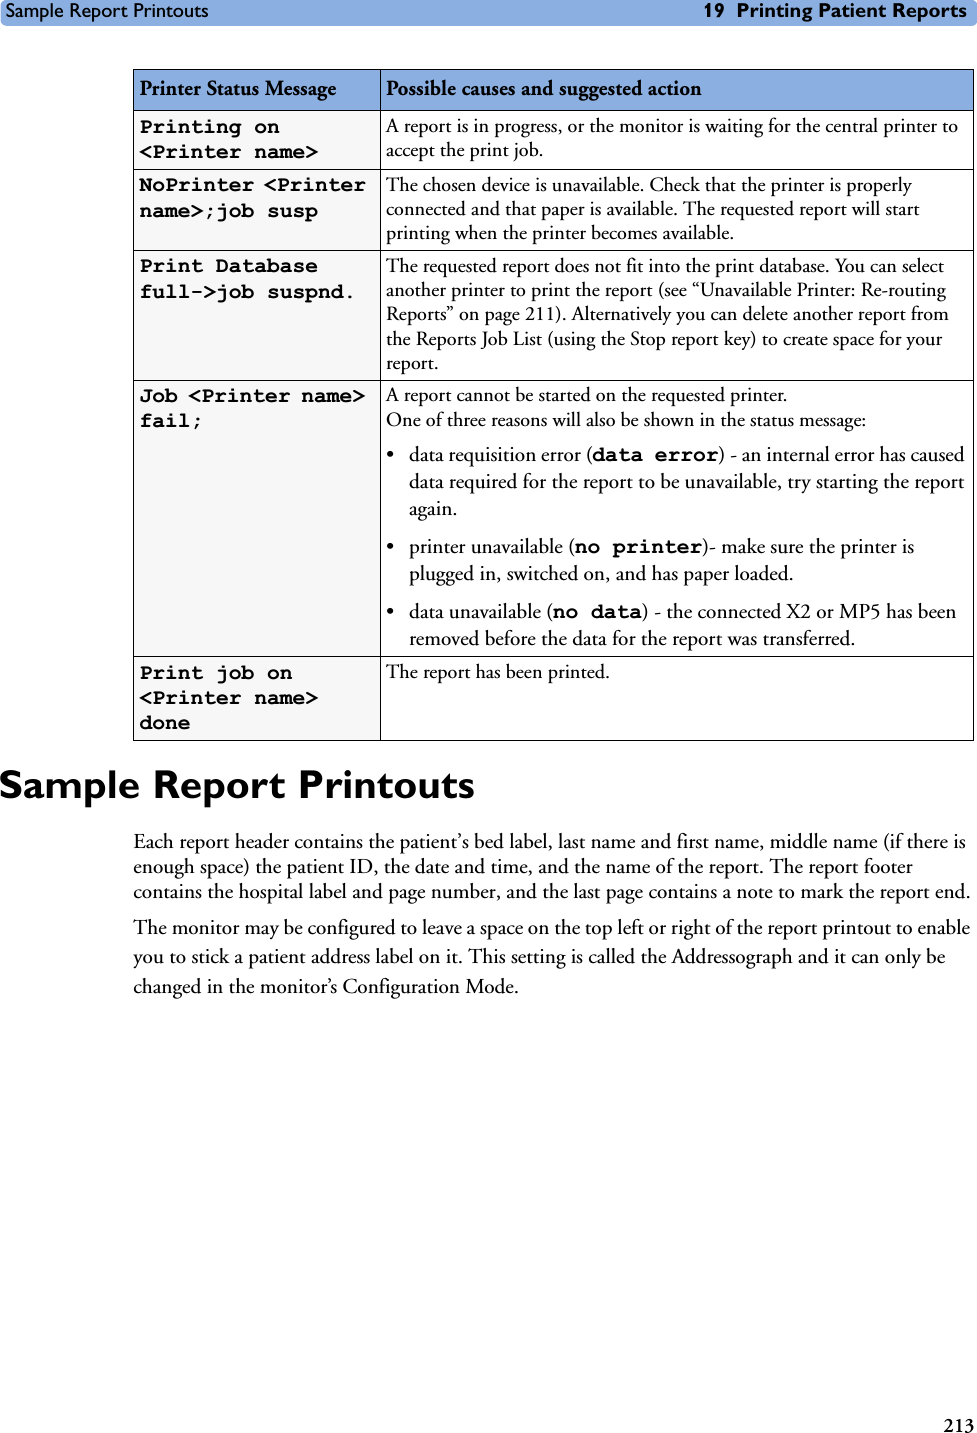 Sample Report Printouts 19 Printing Patient Reports213Sample Report PrintoutsEach report header contains the patient’s bed label, last name and first name, middle name (if there is enough space) the patient ID, the date and time, and the name of the report. The report footer contains the hospital label and page number, and the last page contains a note to mark the report end.The monitor may be configured to leave a space on the top left or right of the report printout to enable you to stick a patient address label on it. This setting is called the Addressograph and it can only be changed in the monitor’s Configuration Mode.Printing on &lt;Printer name&gt;A report is in progress, or the monitor is waiting for the central printer to accept the print job. NoPrinter &lt;Printer name&gt;;job suspThe chosen device is unavailable. Check that the printer is properly connected and that paper is available. The requested report will start printing when the printer becomes available.Print Database full-&gt;job suspnd.The requested report does not fit into the print database. You can select another printer to print the report (see “Unavailable Printer: Re-routing Reports” on page 211). Alternatively you can delete another report from the Reports Job List (using the Stop report key) to create space for your report. Job &lt;Printer name&gt; fail; A report cannot be started on the requested printer. One of three reasons will also be shown in the status message: • data requisition error (data error) - an internal error has caused data required for the report to be unavailable, try starting the report again.• printer unavailable (no printer)- make sure the printer is plugged in, switched on, and has paper loaded. • data unavailable (no data) - the connected X2 or MP5 has been removed before the data for the report was transferred.Print job on &lt;Printer name&gt; doneThe report has been printed. Printer Status Message Possible causes and suggested action